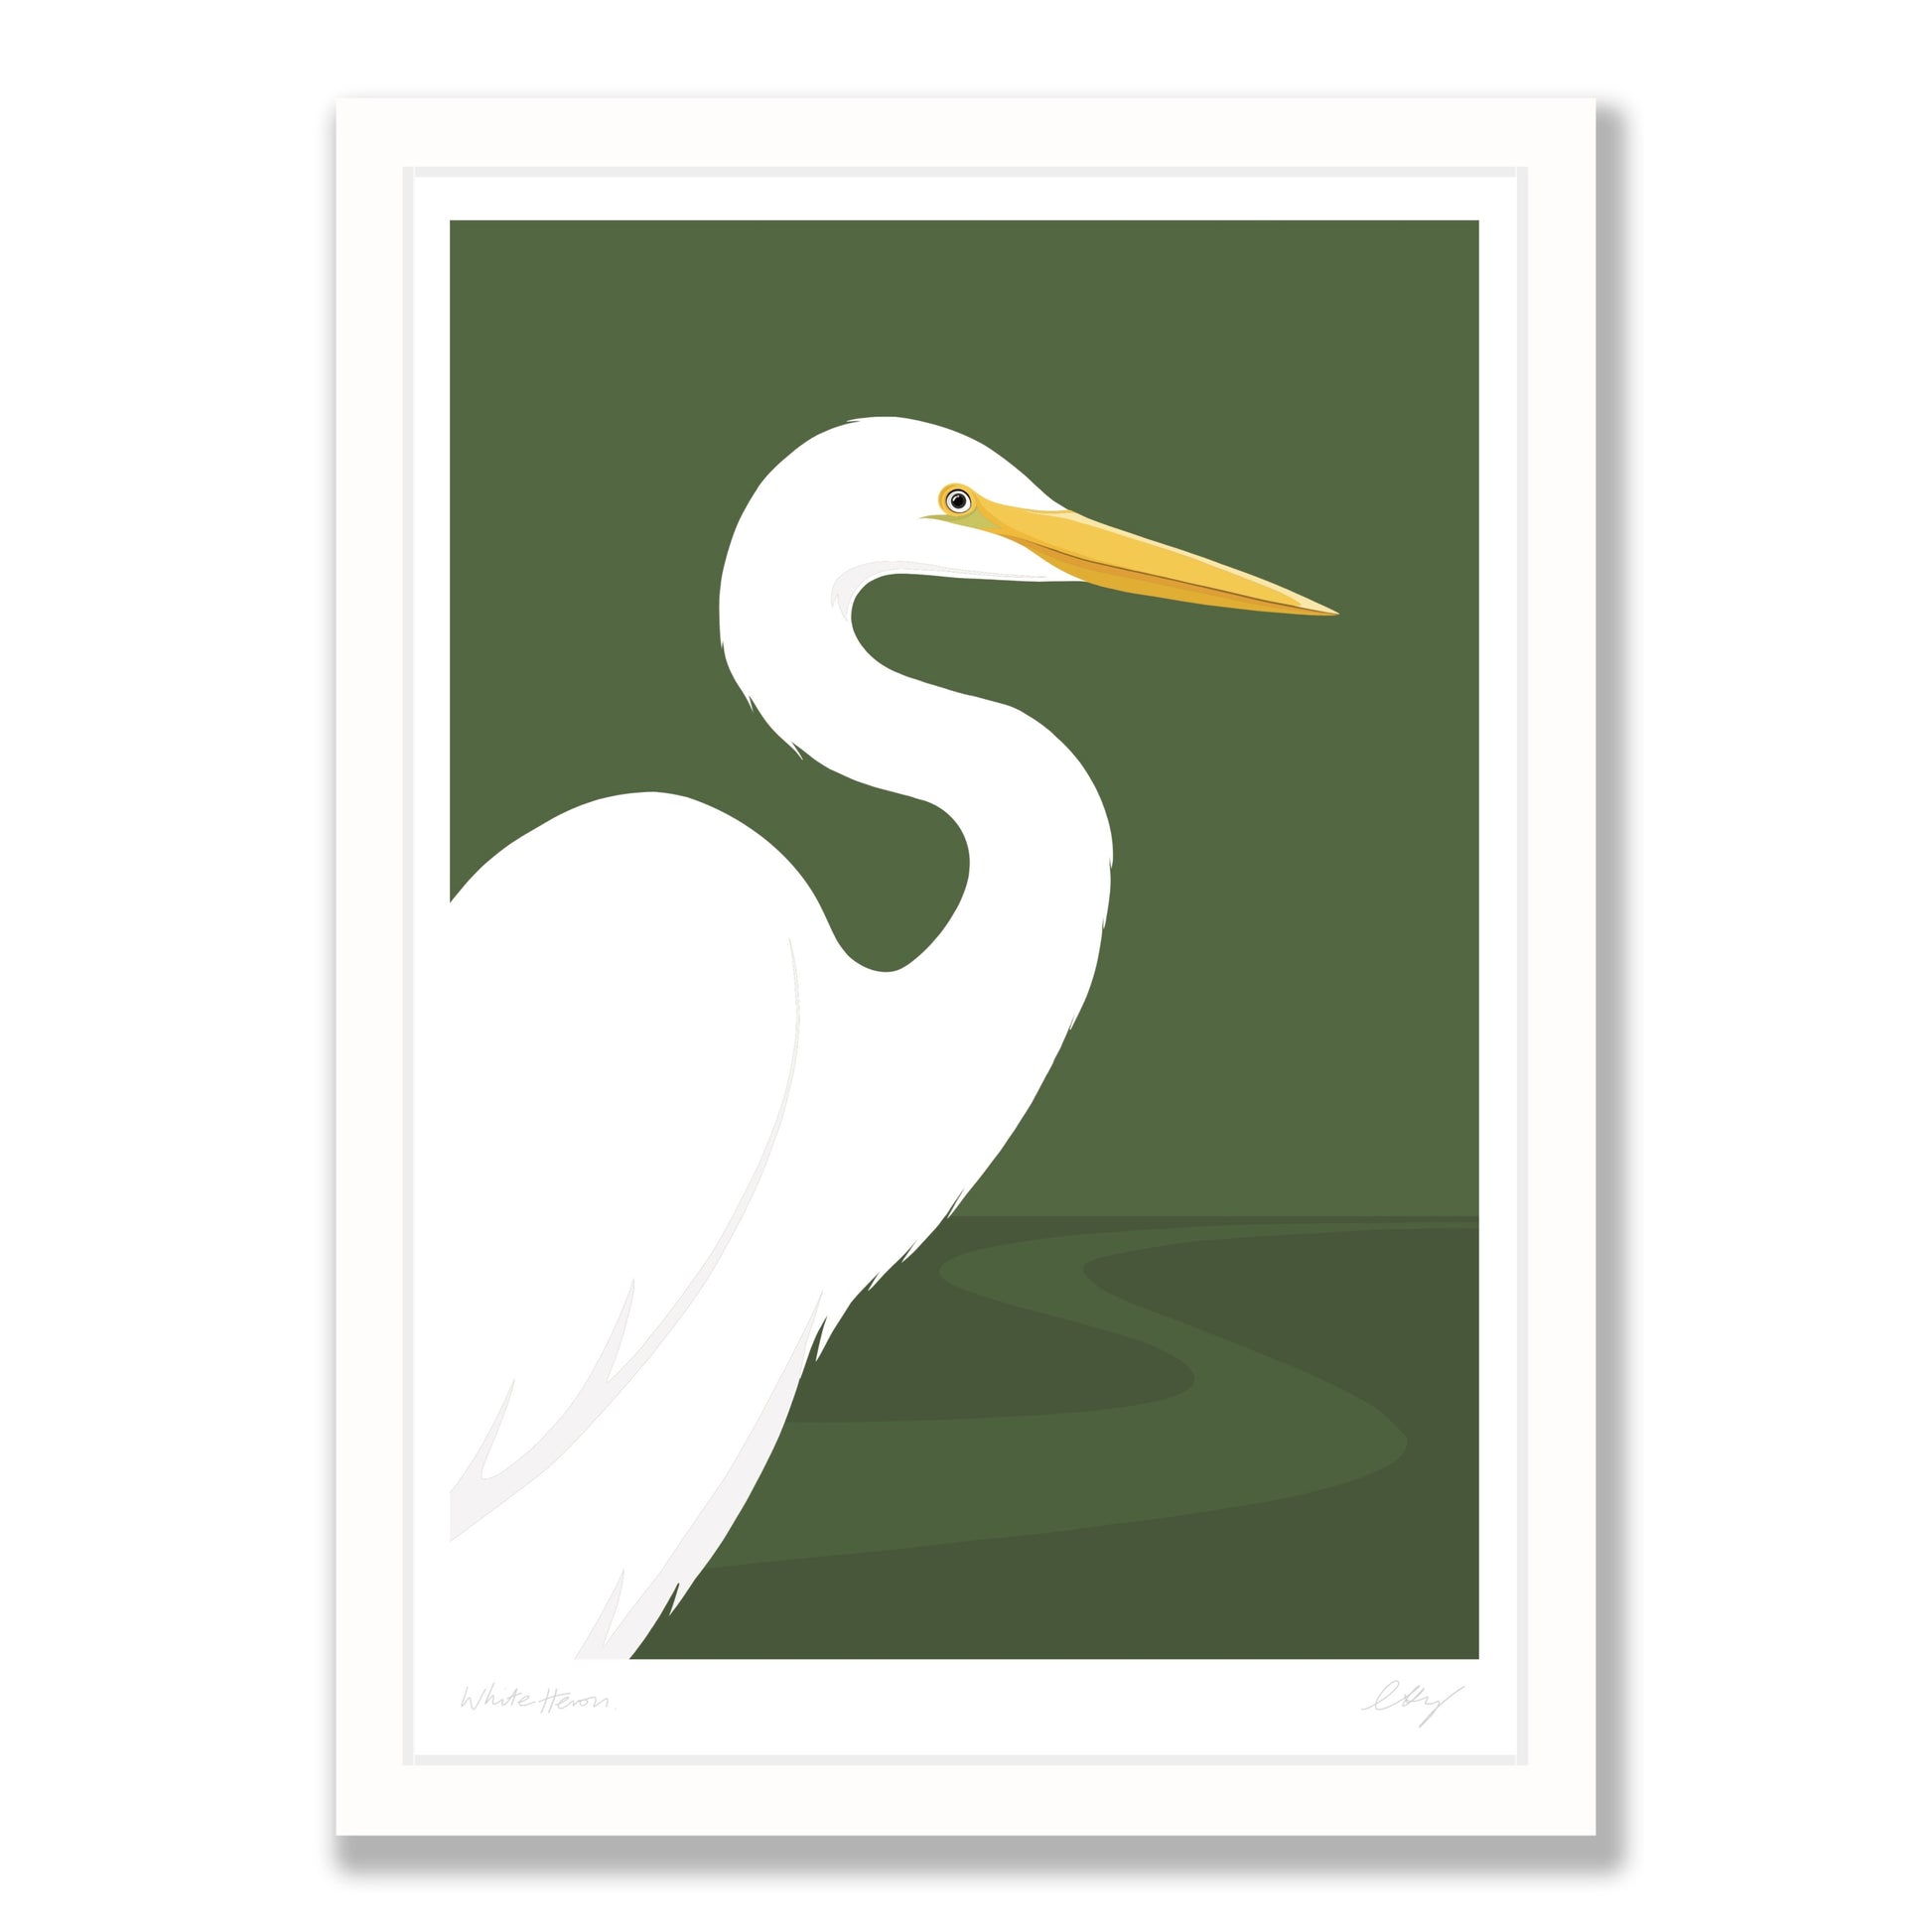 White Heron art print in natural frame, by NZ artist Hansby Design